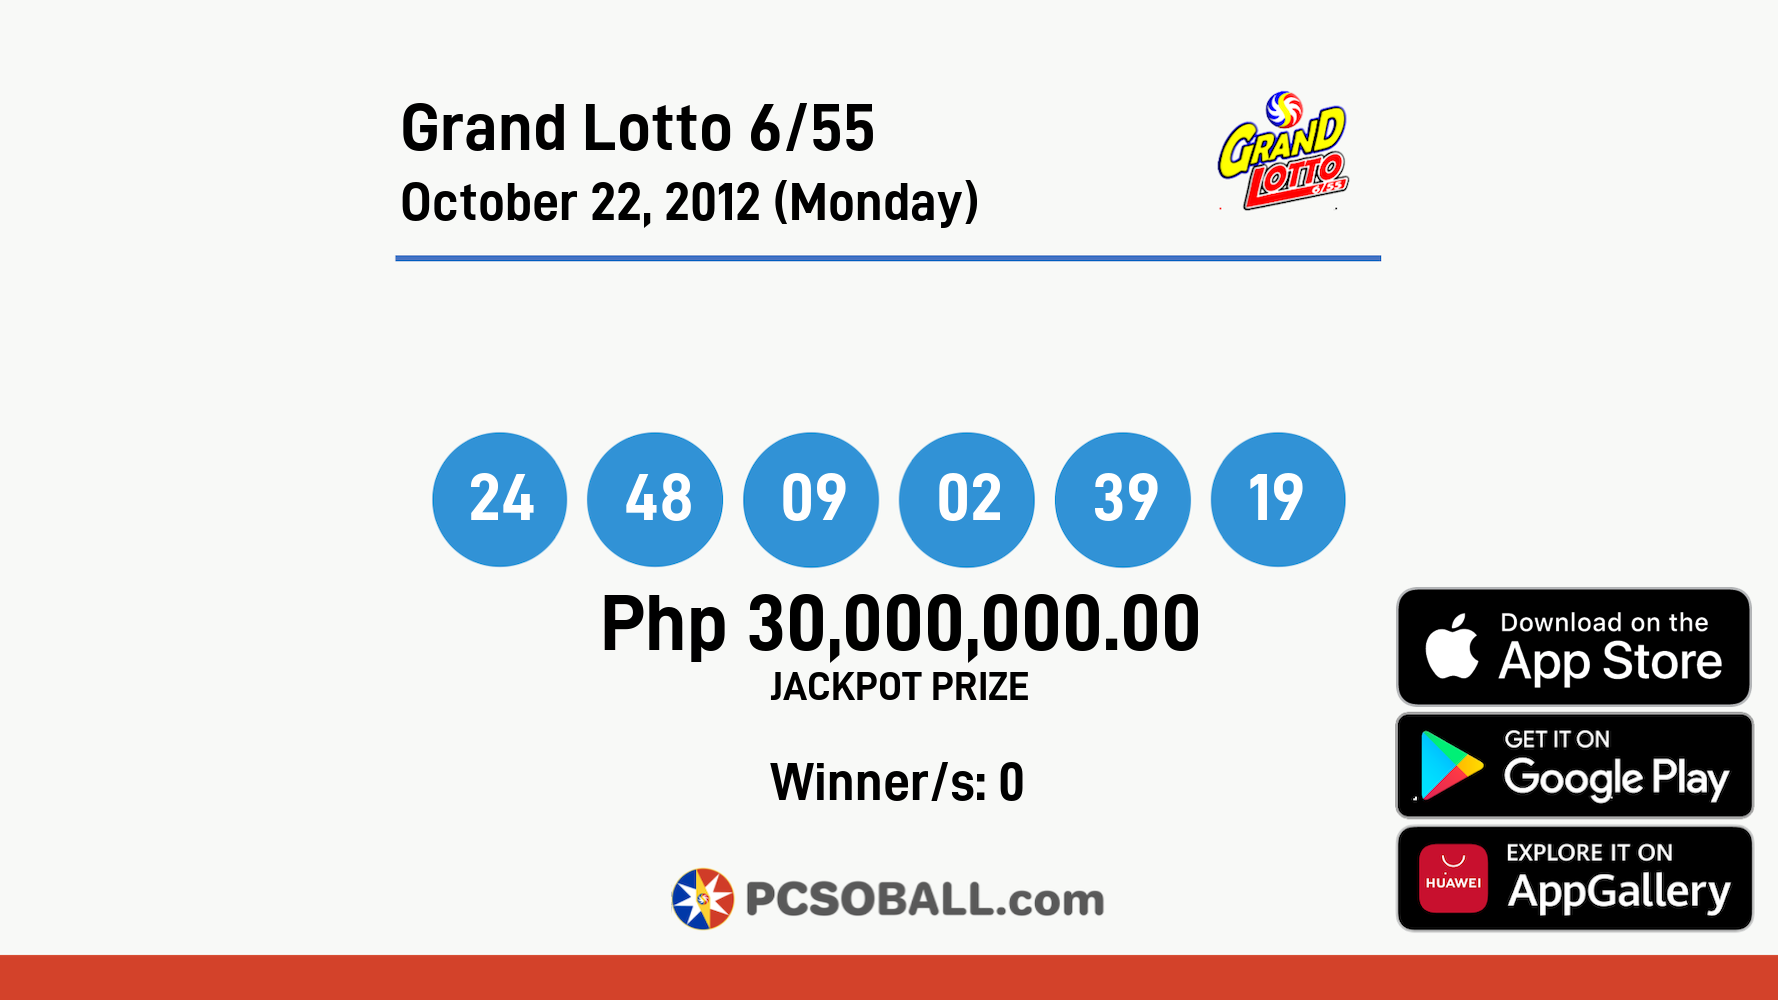 Grand Lotto 6/55 October 22, 2012 (Monday) Result